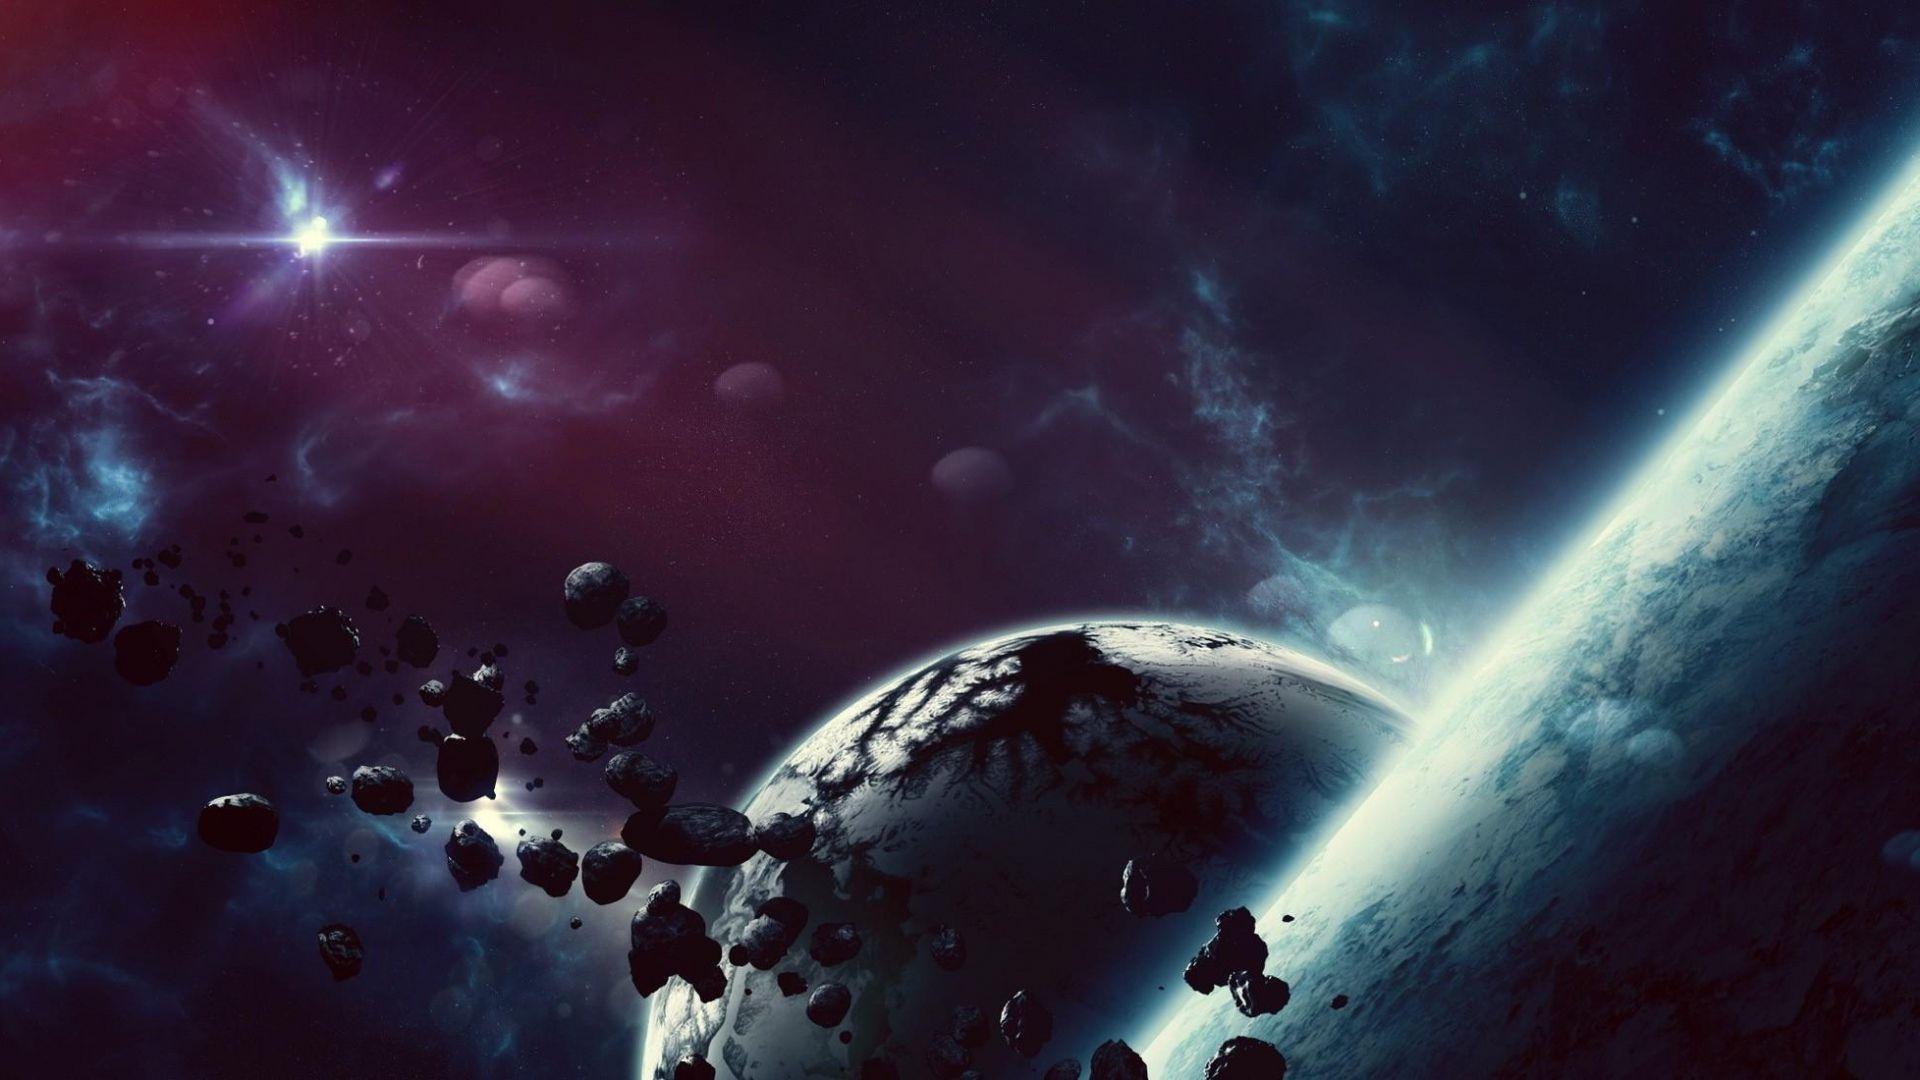 Download Wallpaper 1920x1080 space, asteroids, planets, galaxies